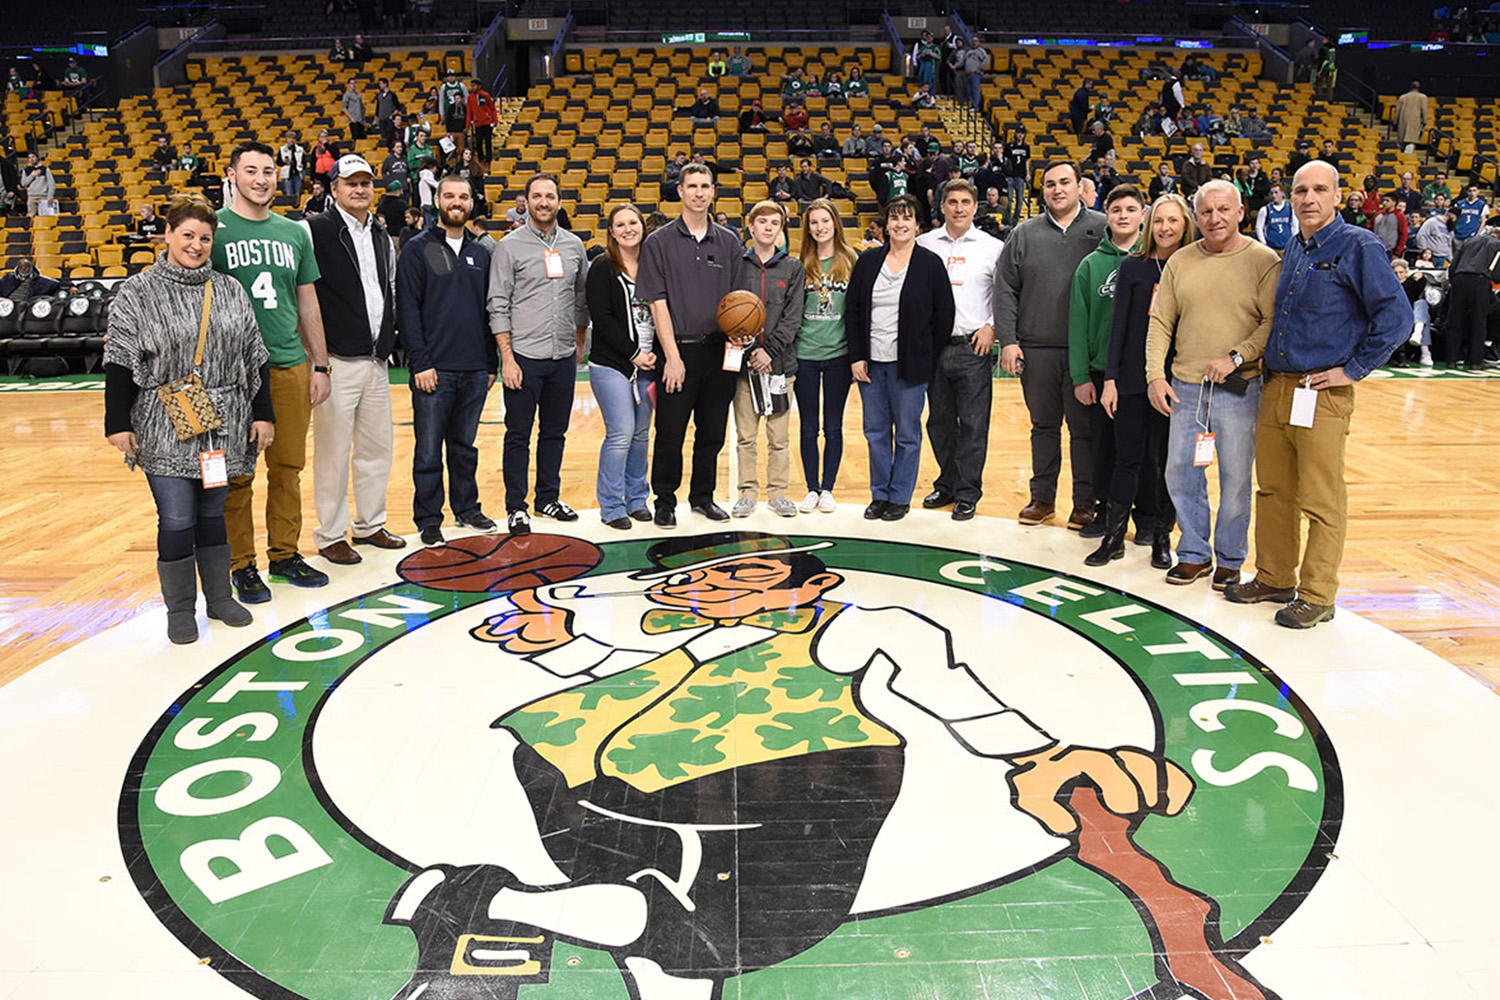 Group of Tocci staff members on the Celtics basketball court after a game